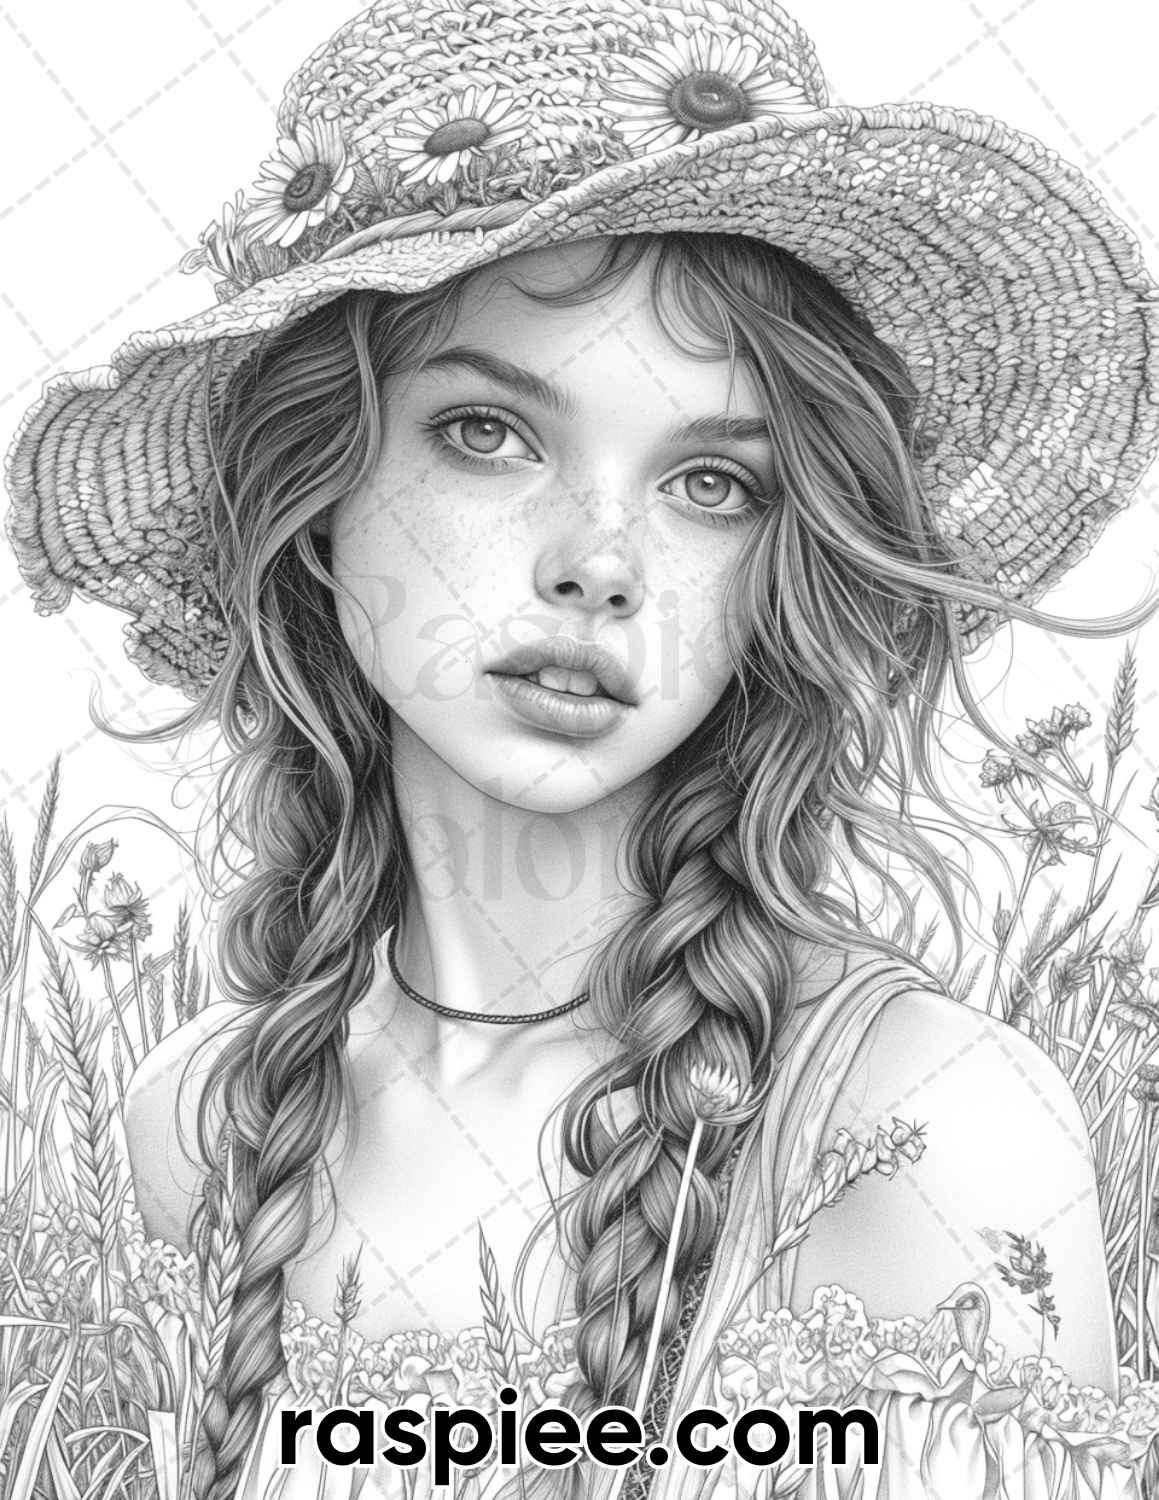 adult coloring pages, adult coloring sheets, adult coloring book pdf, adult coloring book printable, grayscale coloring pages, grayscale coloring books, portrait coloring pages for adults, portrait coloring book, grayscale illustration, vintage country girls coloring pages